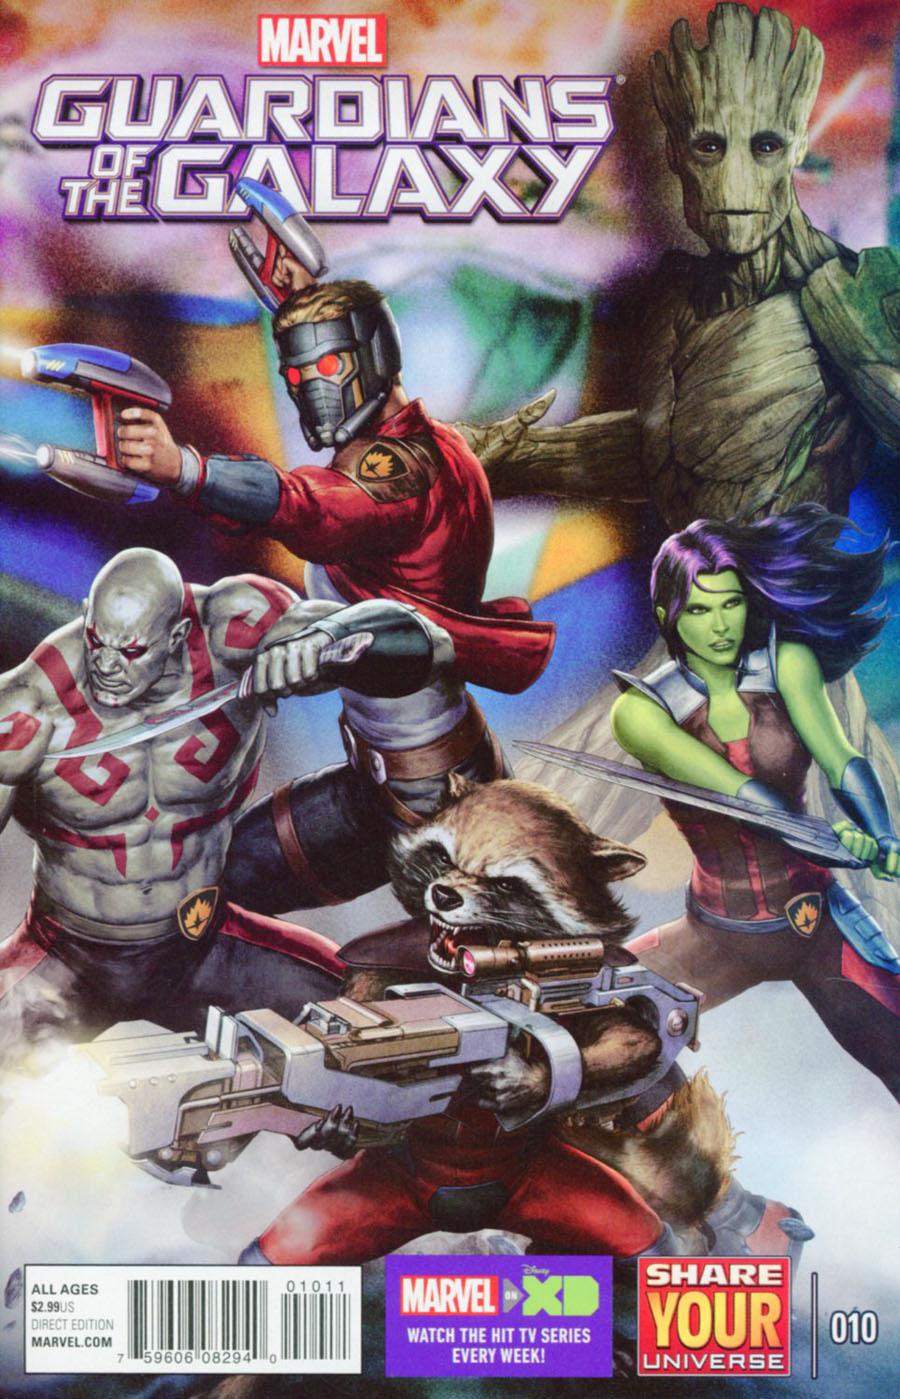 Marvel Universe Guardians of the Galaxy Vol. 2 #10